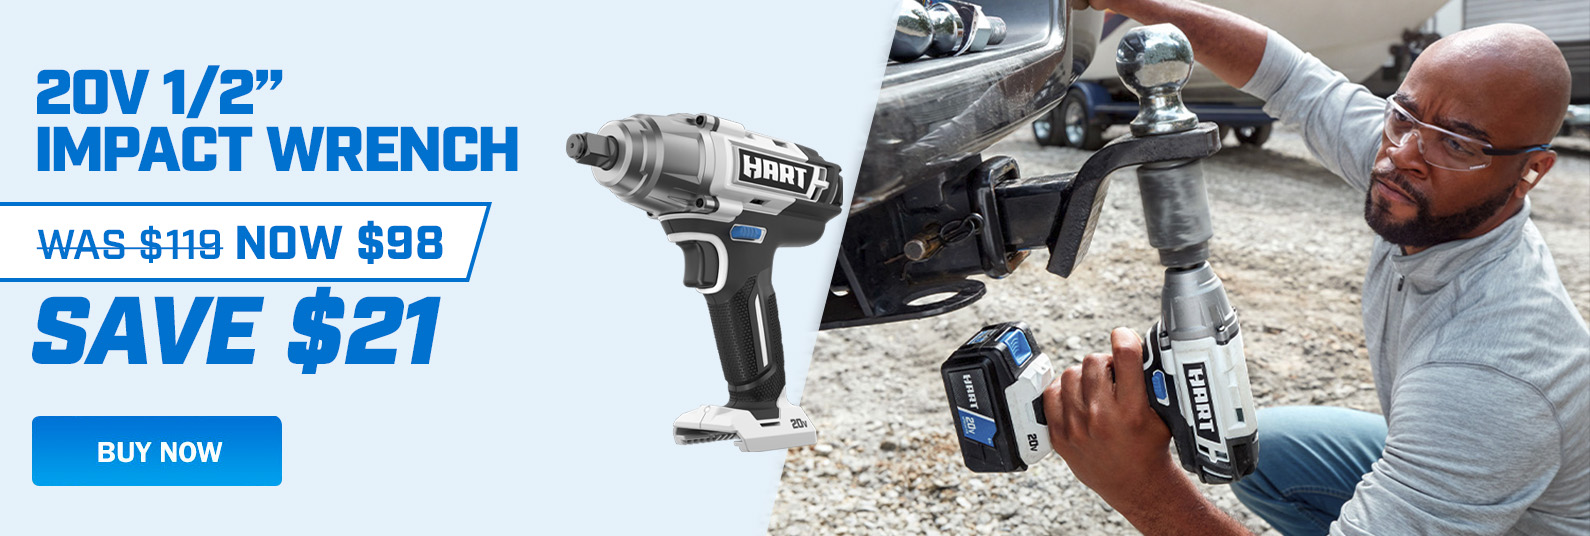 1/2 Impact Wrench Rollback